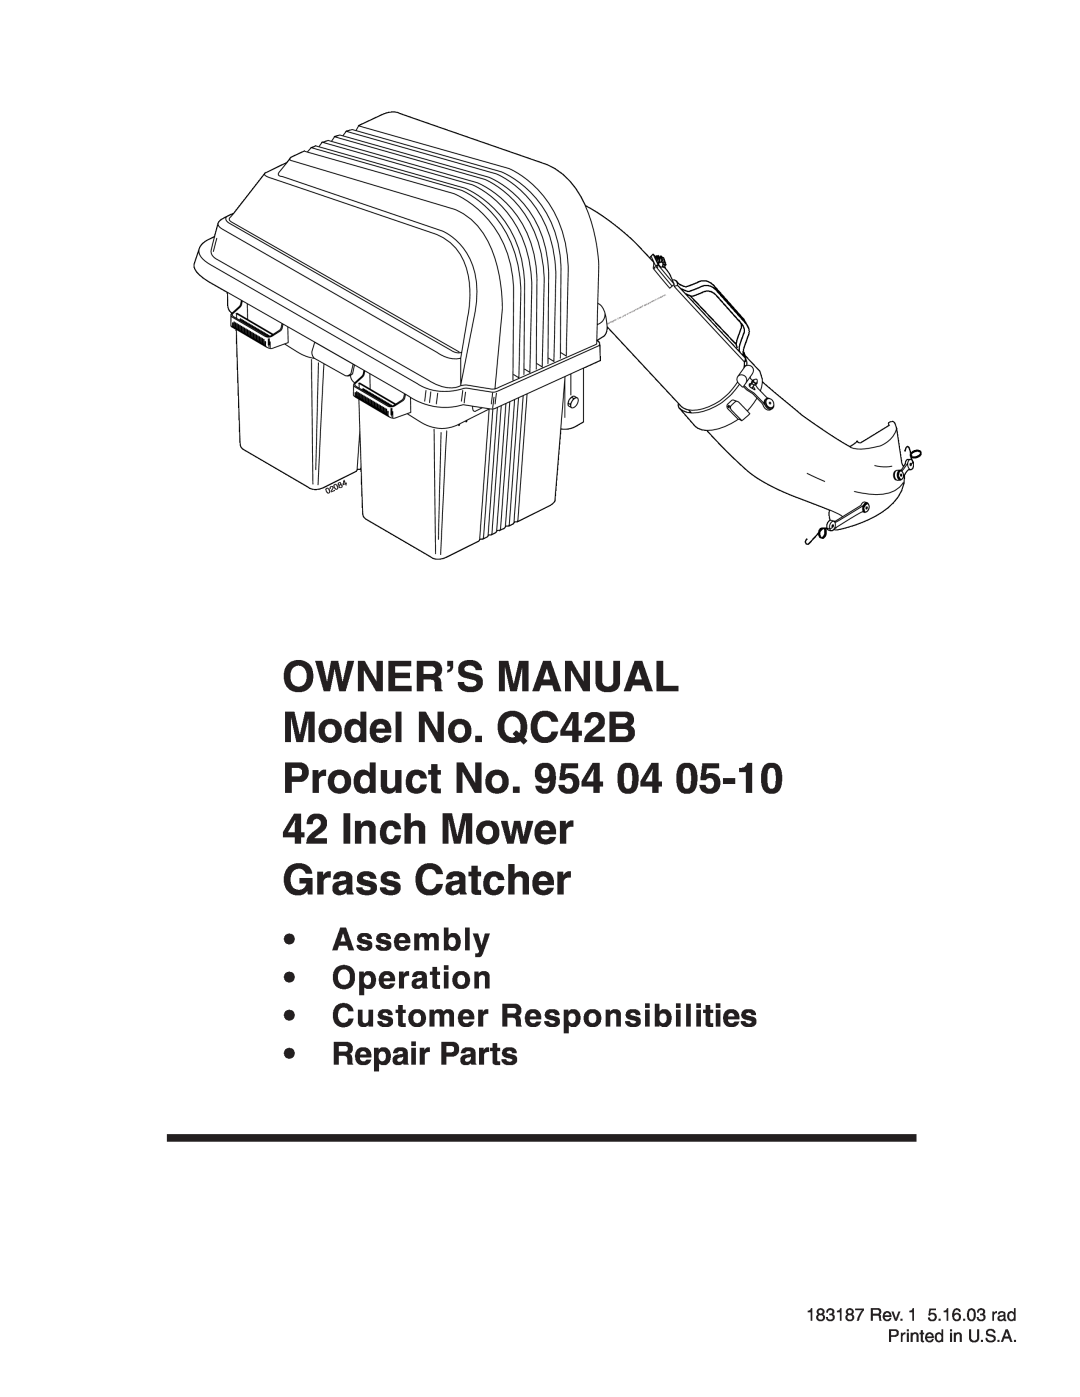 Poulan 954 04 05-10 owner manual Inch Mower Grass Catcher, Assembly Operation Customer Responsibilities, Repair Parts 